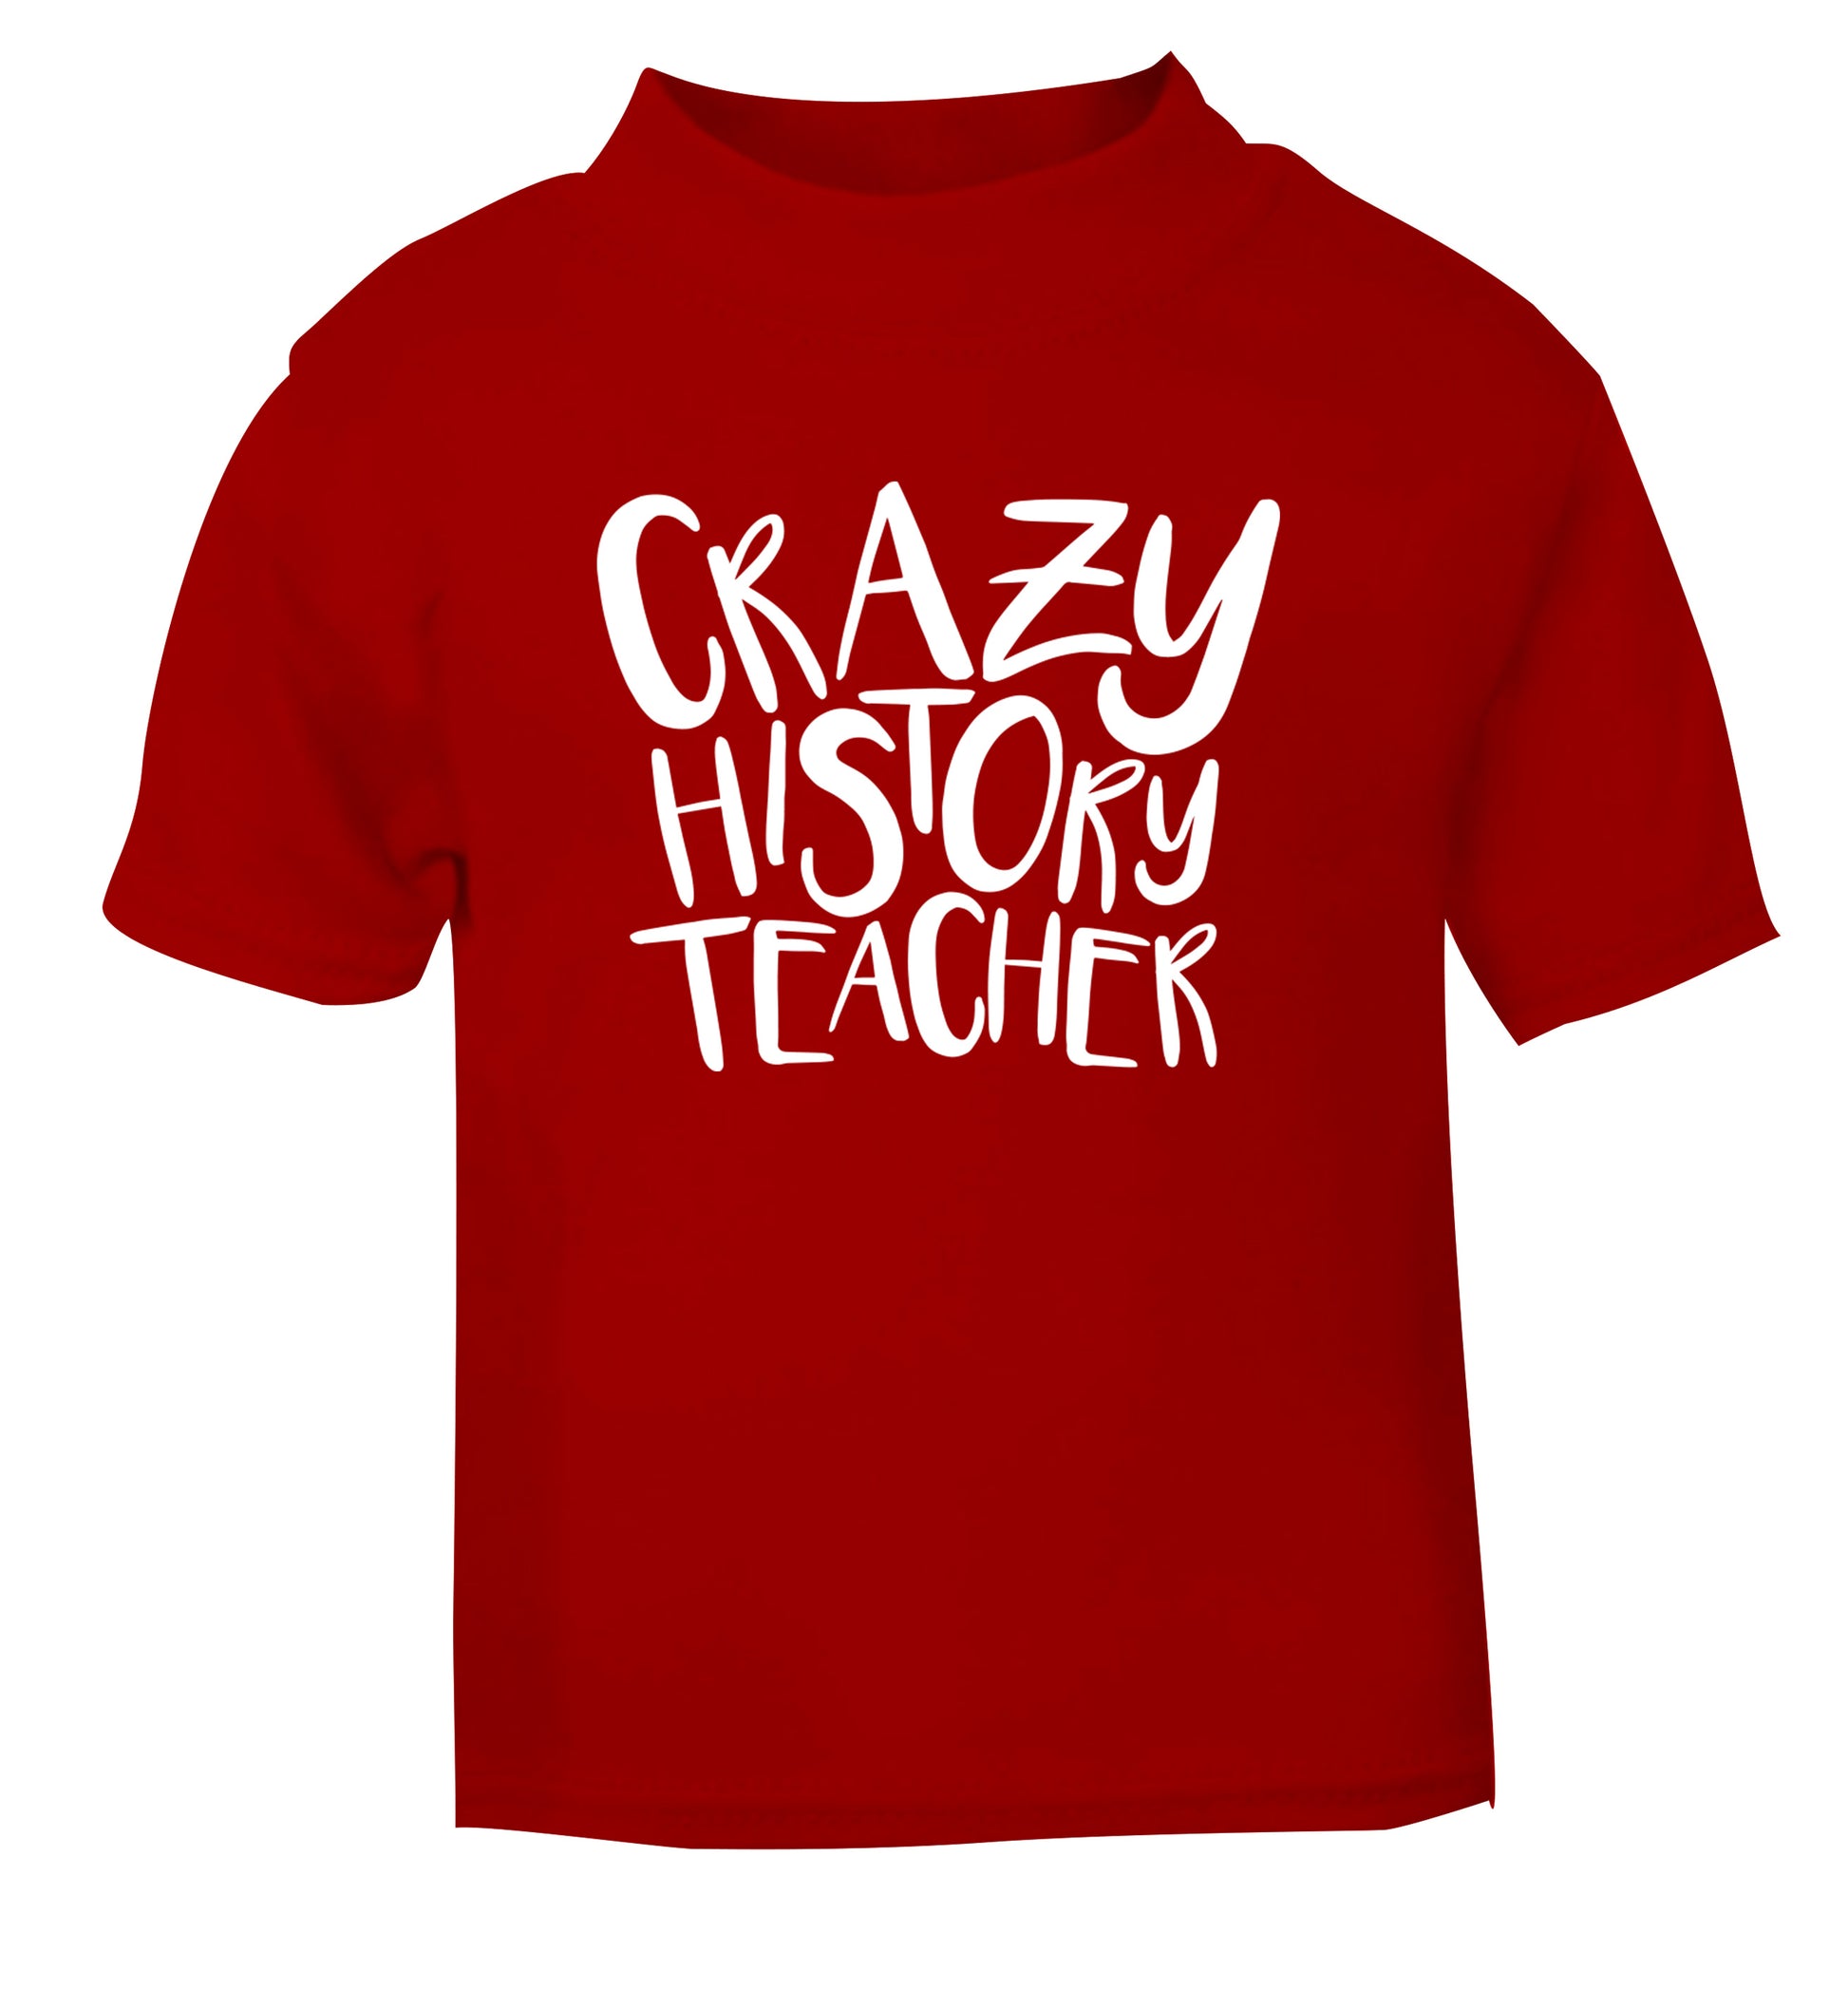 Crazy history teacher red Baby Toddler Tshirt 2 Years